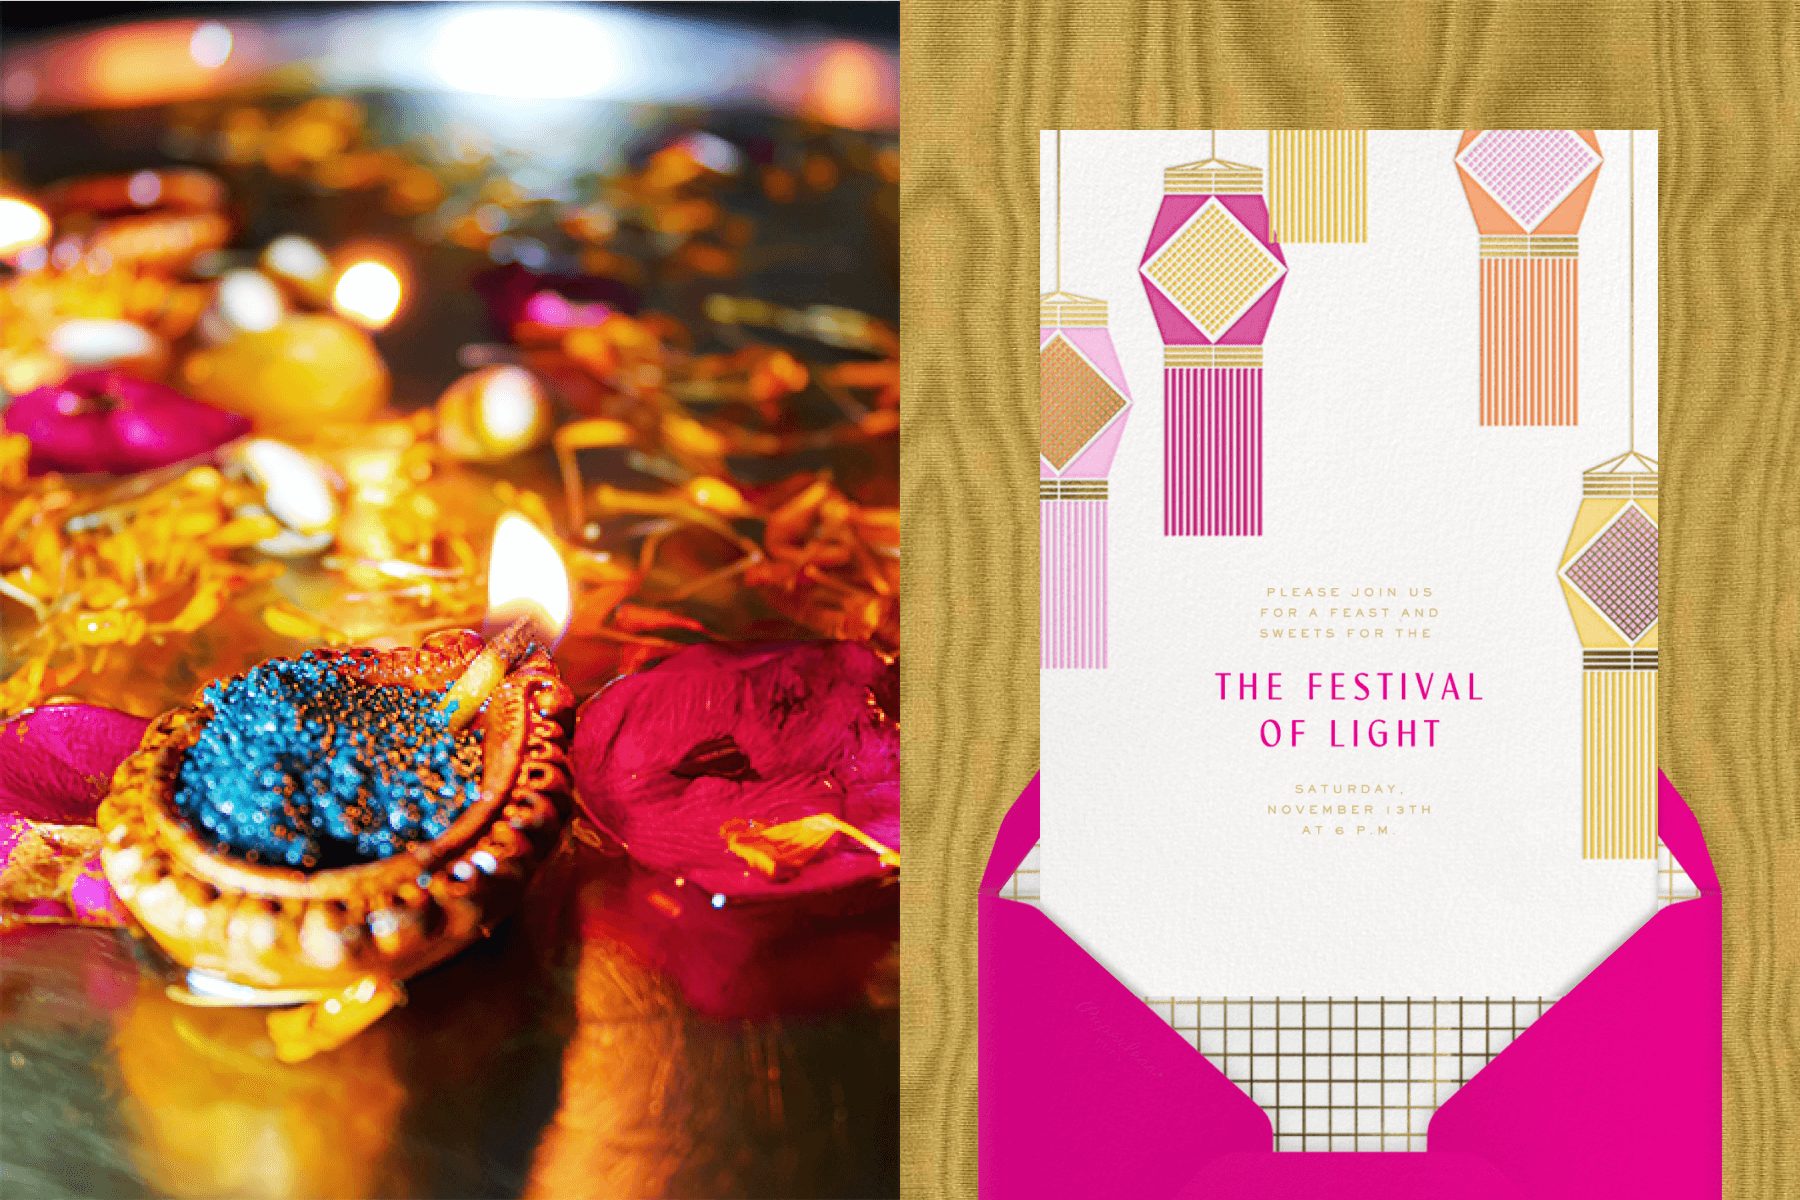 Left: A close up photo of lit diyas. | Right: A Diwali invitation featuring illustrations of hanging lanterns.